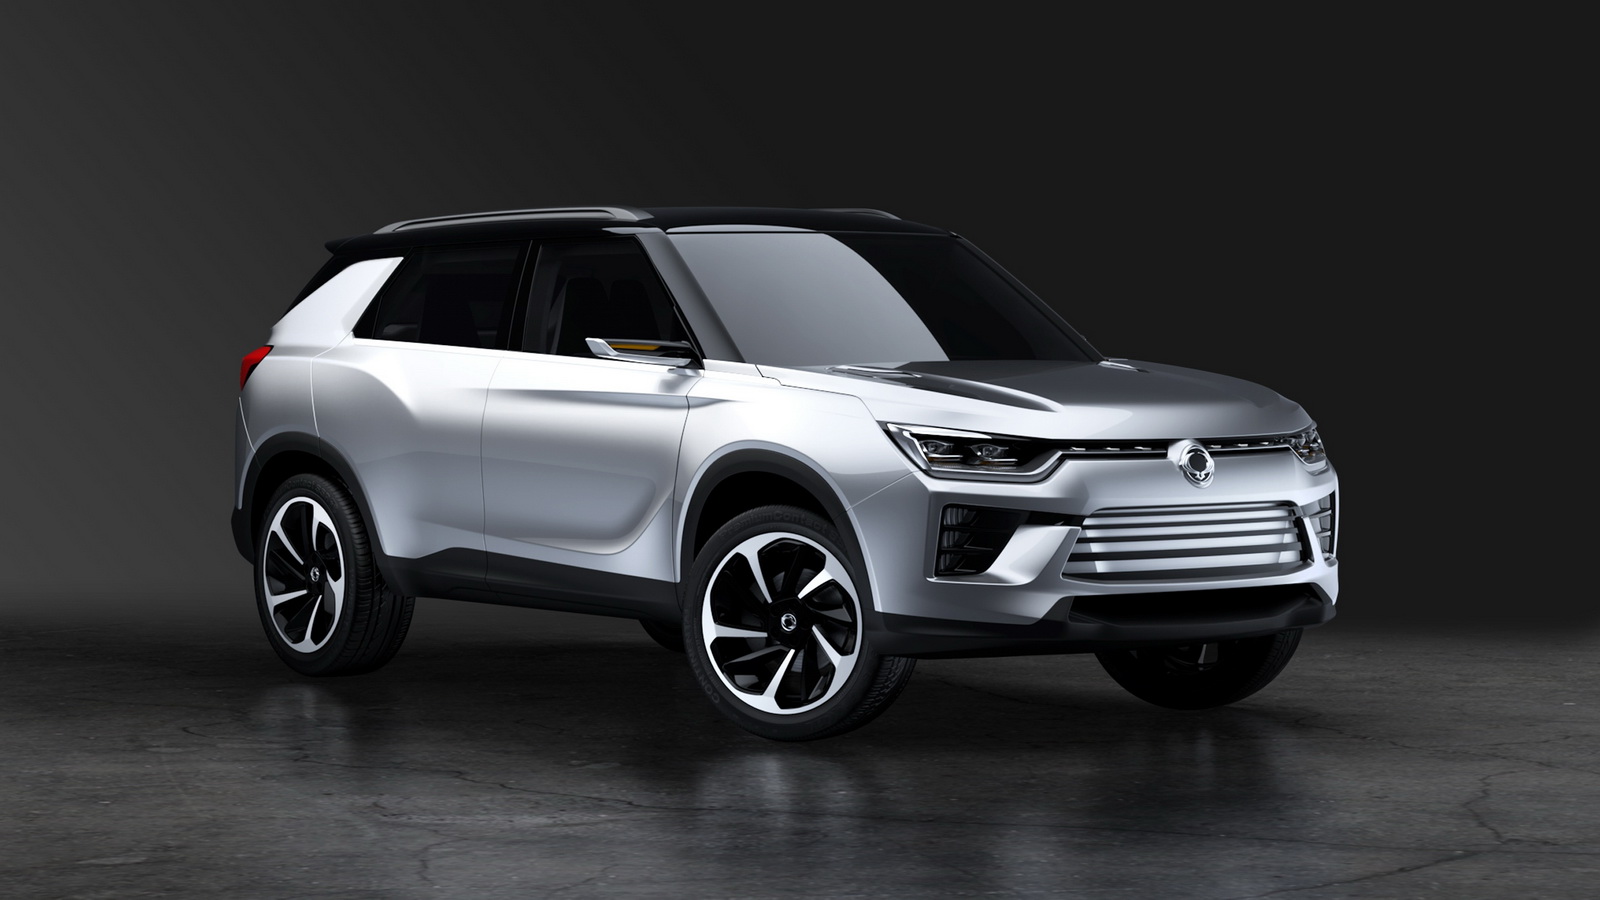 SsangYong SIV-2 Midsize SUV Concept Displayed @ 2016 Geneva Motor Show